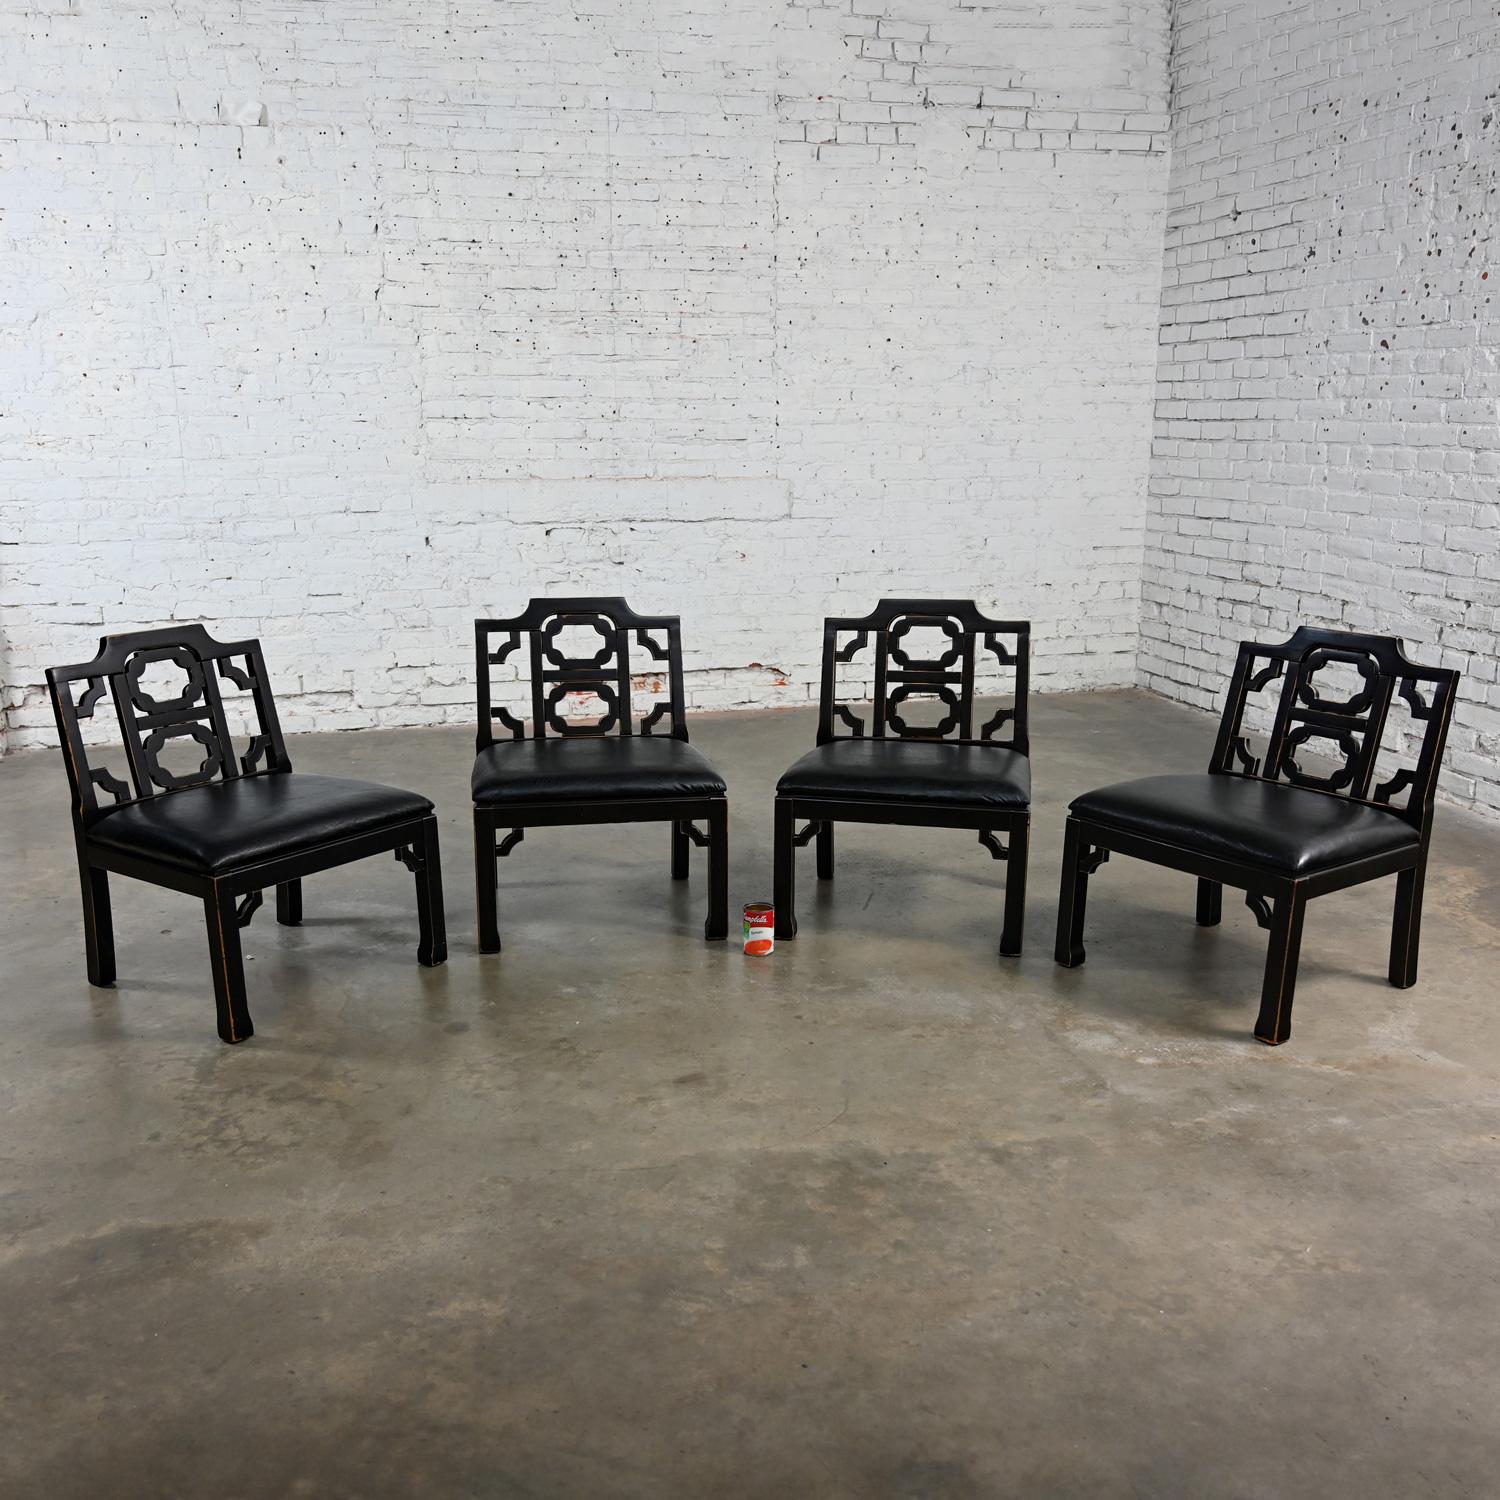 4 Hollywood Regency Chinese Chippendale Style Black Accent Chairs by Thomasville In Good Condition For Sale In Topeka, KS